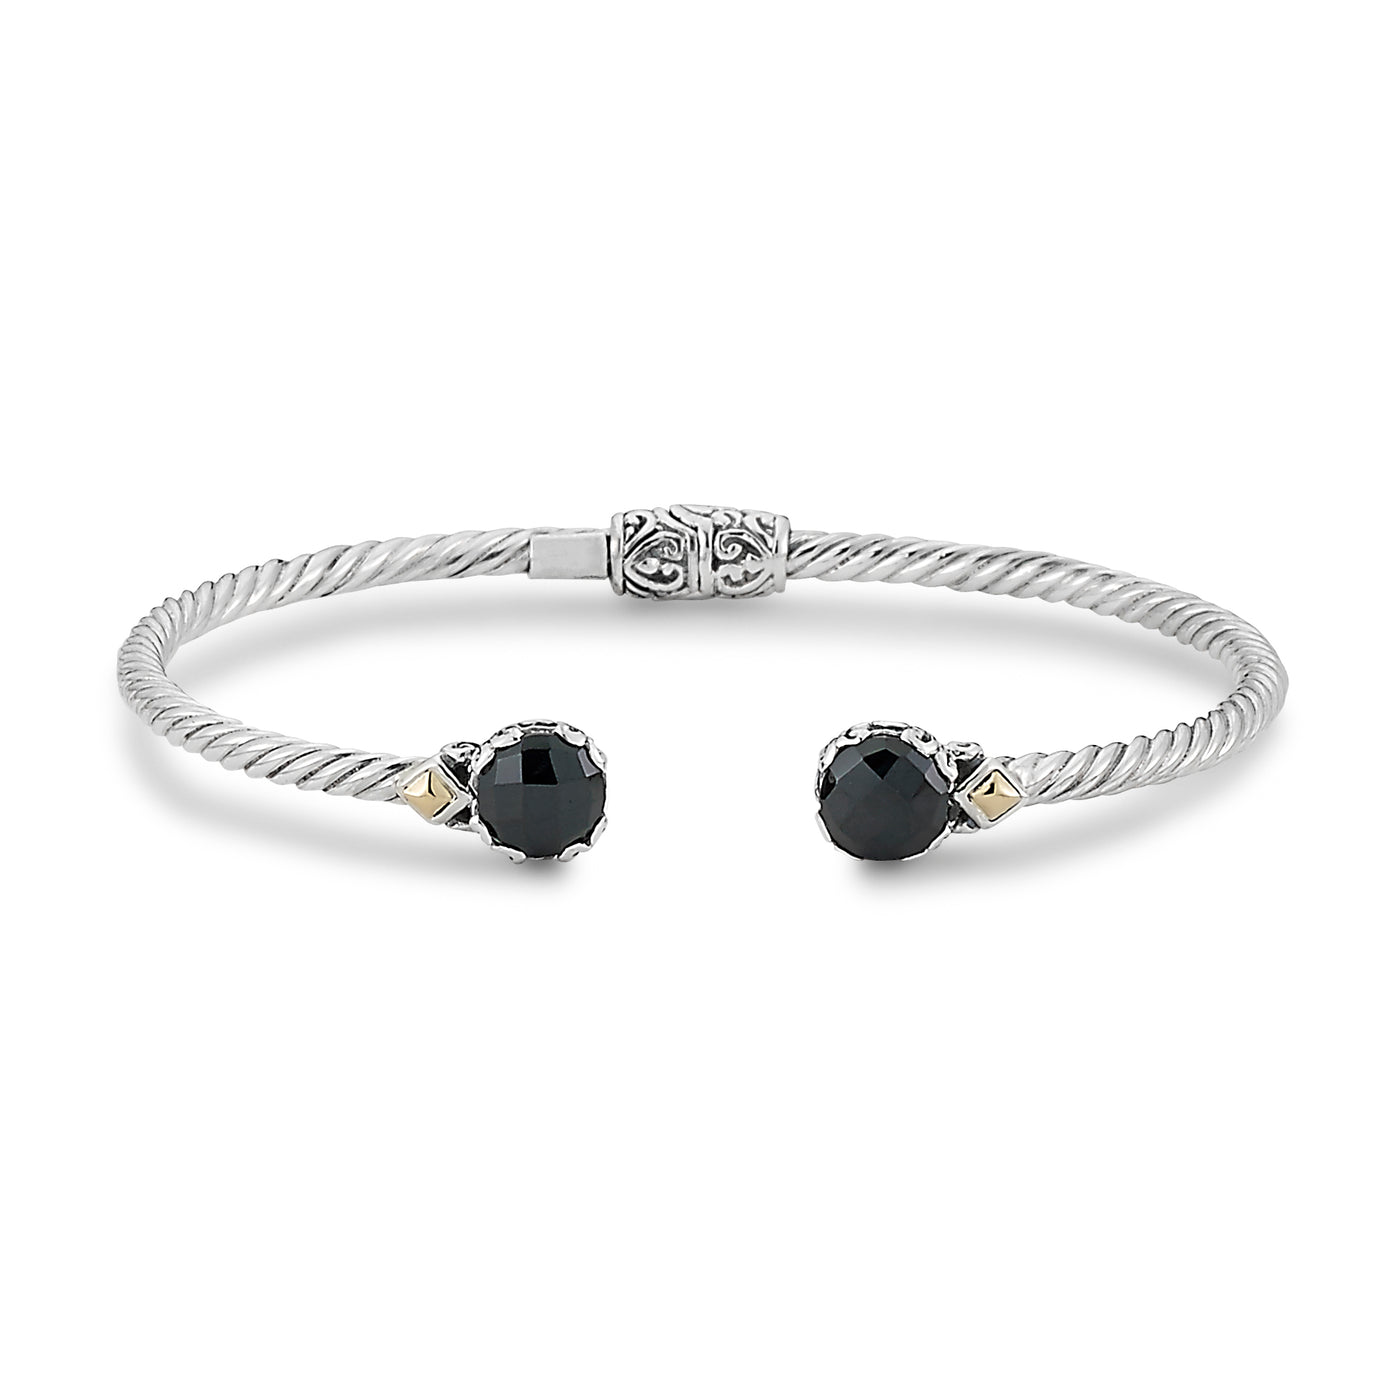 SS/18K 7MM ROUND BLACK SPINEL TWISTED CABLE BANGLE IN 3MM